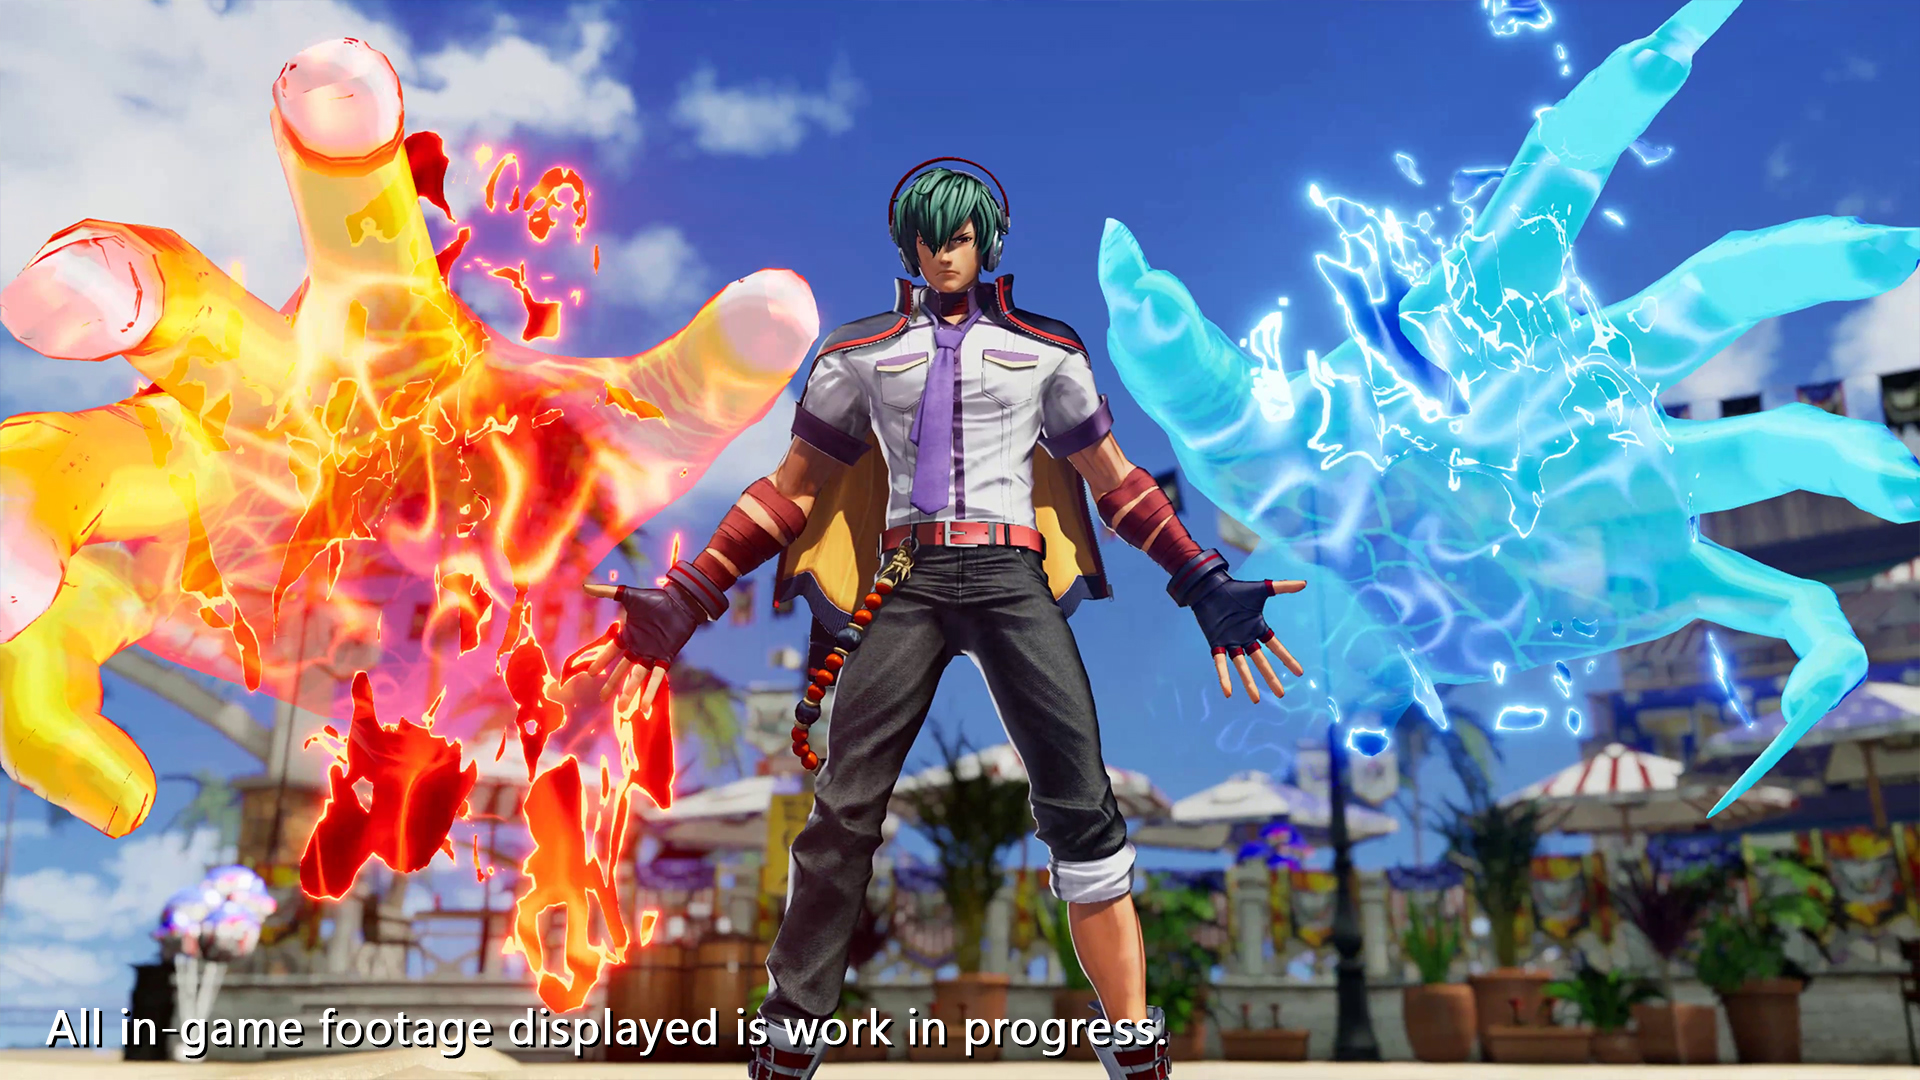 Latest 'King of Fighters' upholds fighting series' tradition